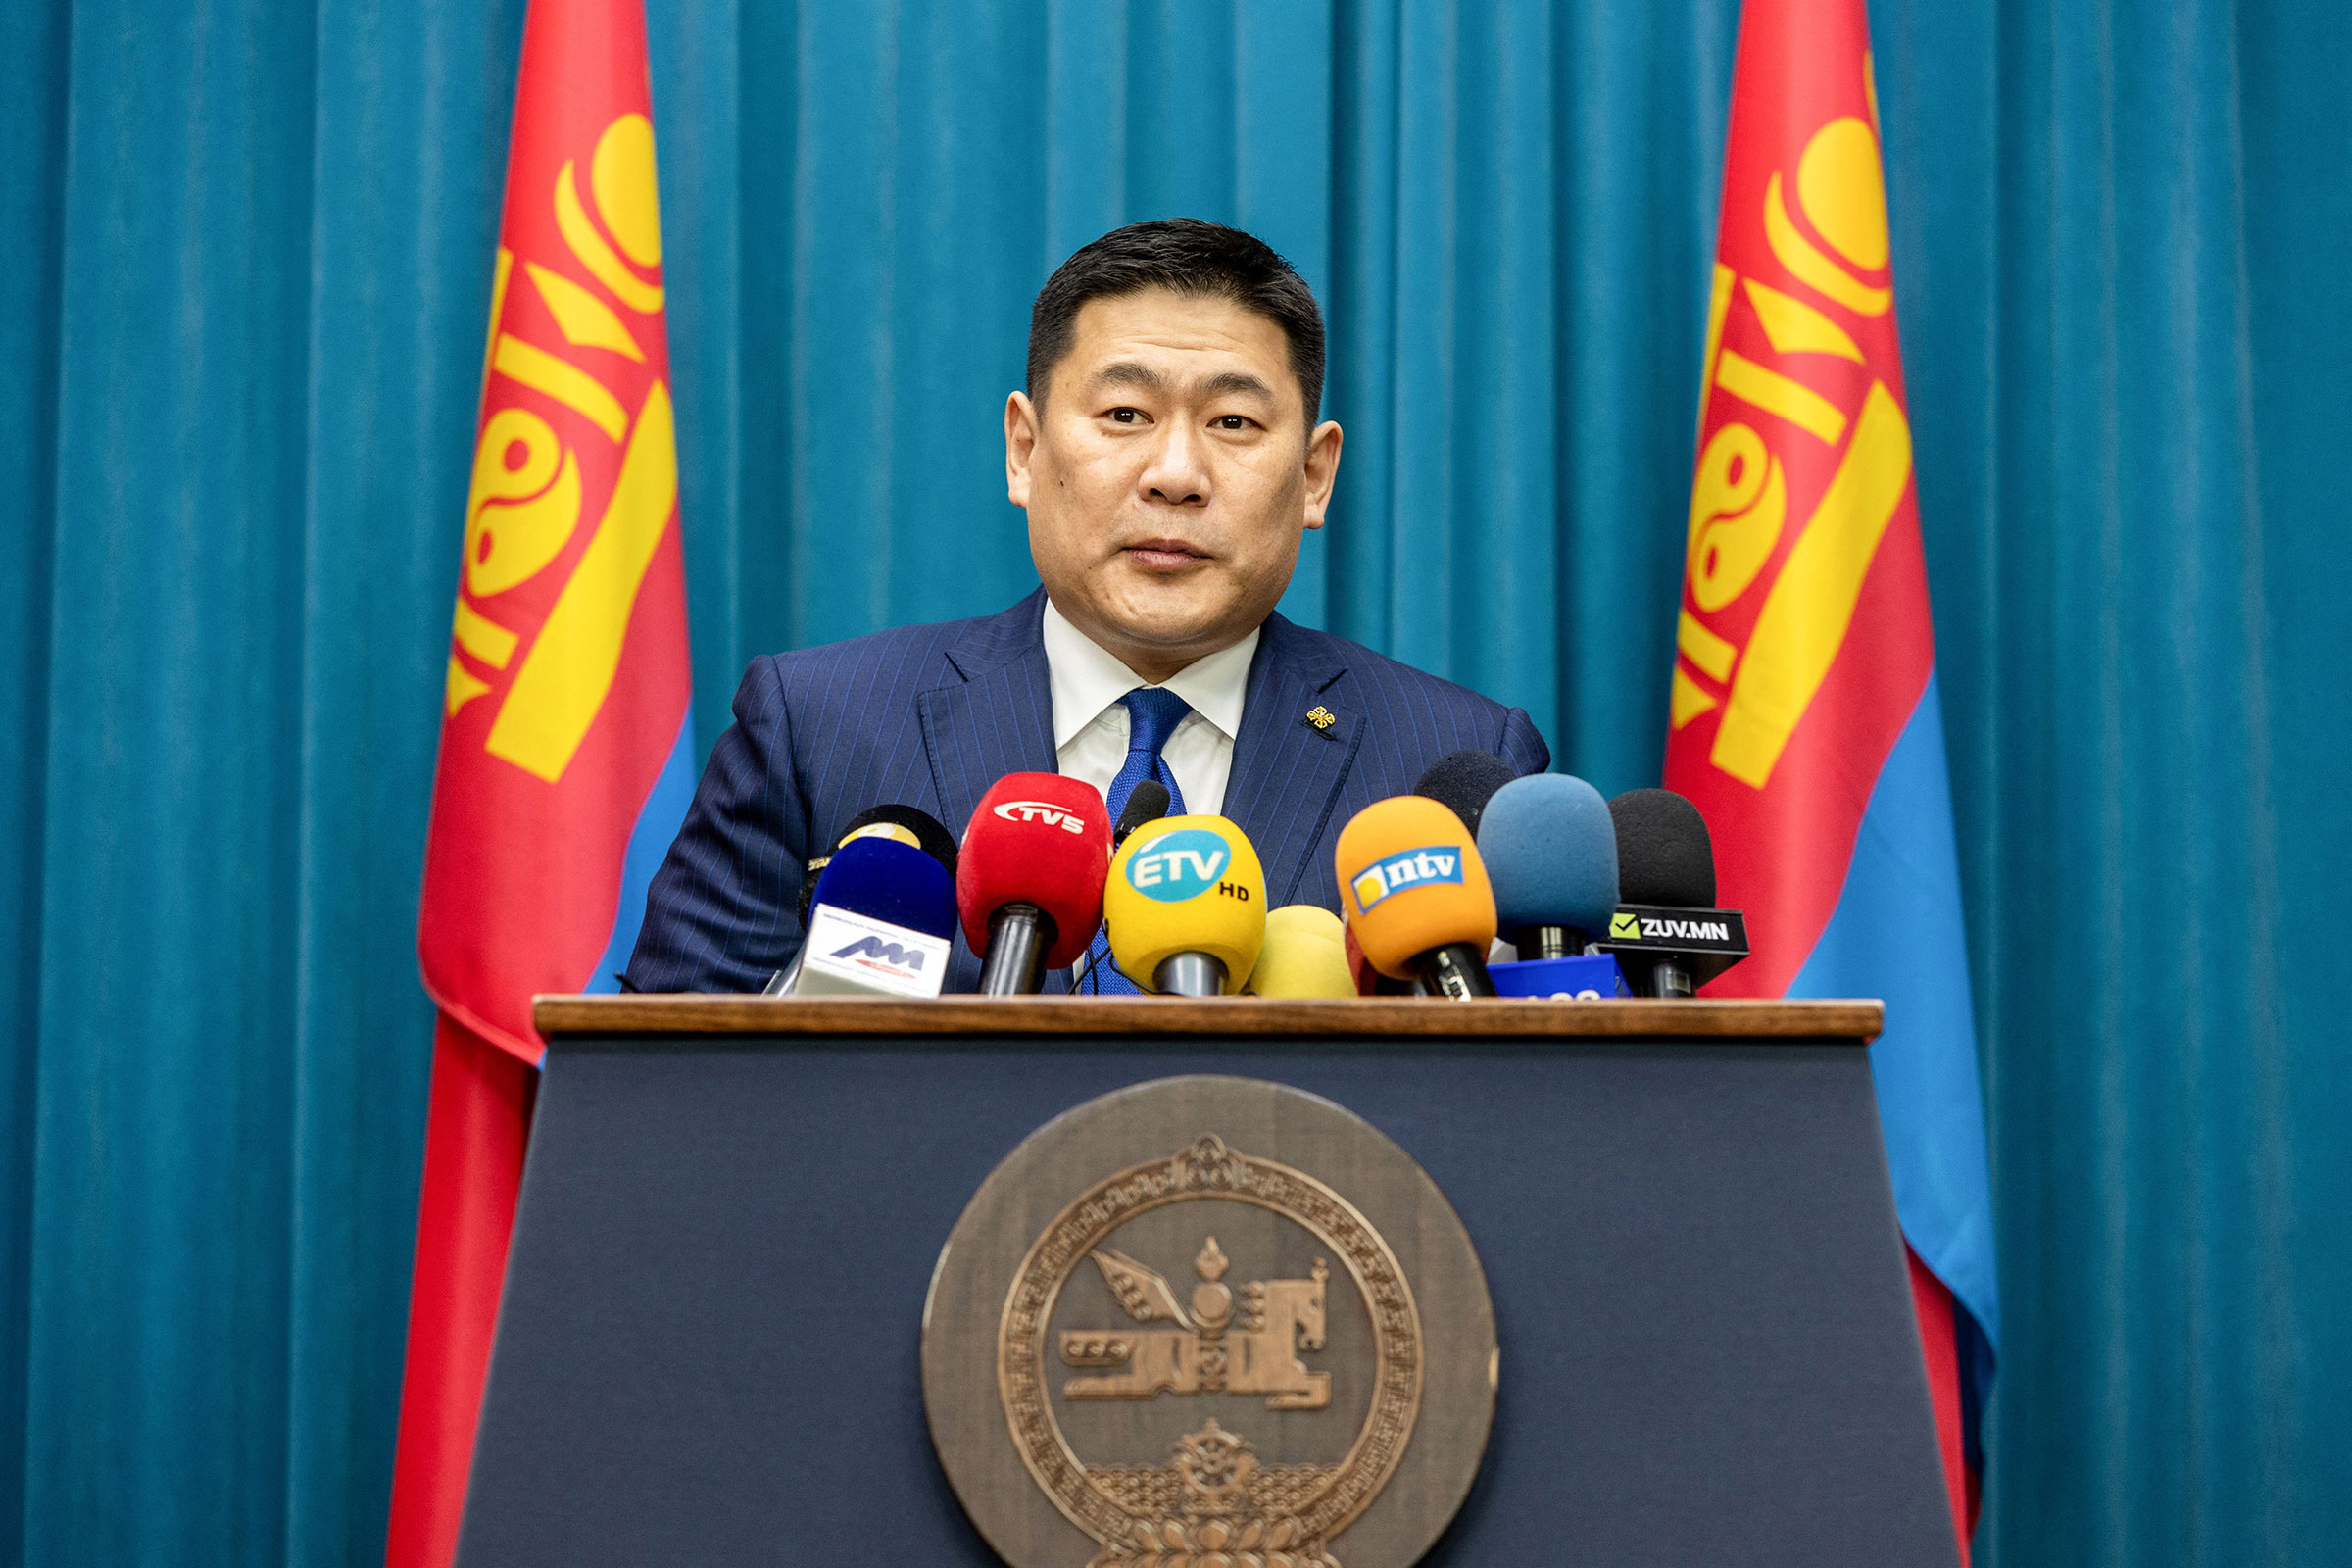 Mongolia's Prime Minister Luvsannamsrai Oyun-Erdene speaks during a meeting to announce the reopening of Mongolia's borders to international travel, in Ulaanbaatar, the capital of Mongolia, on Feb. 14, 2022. (Byambasuren Byamba-Ochir—AFP/Getty Images)